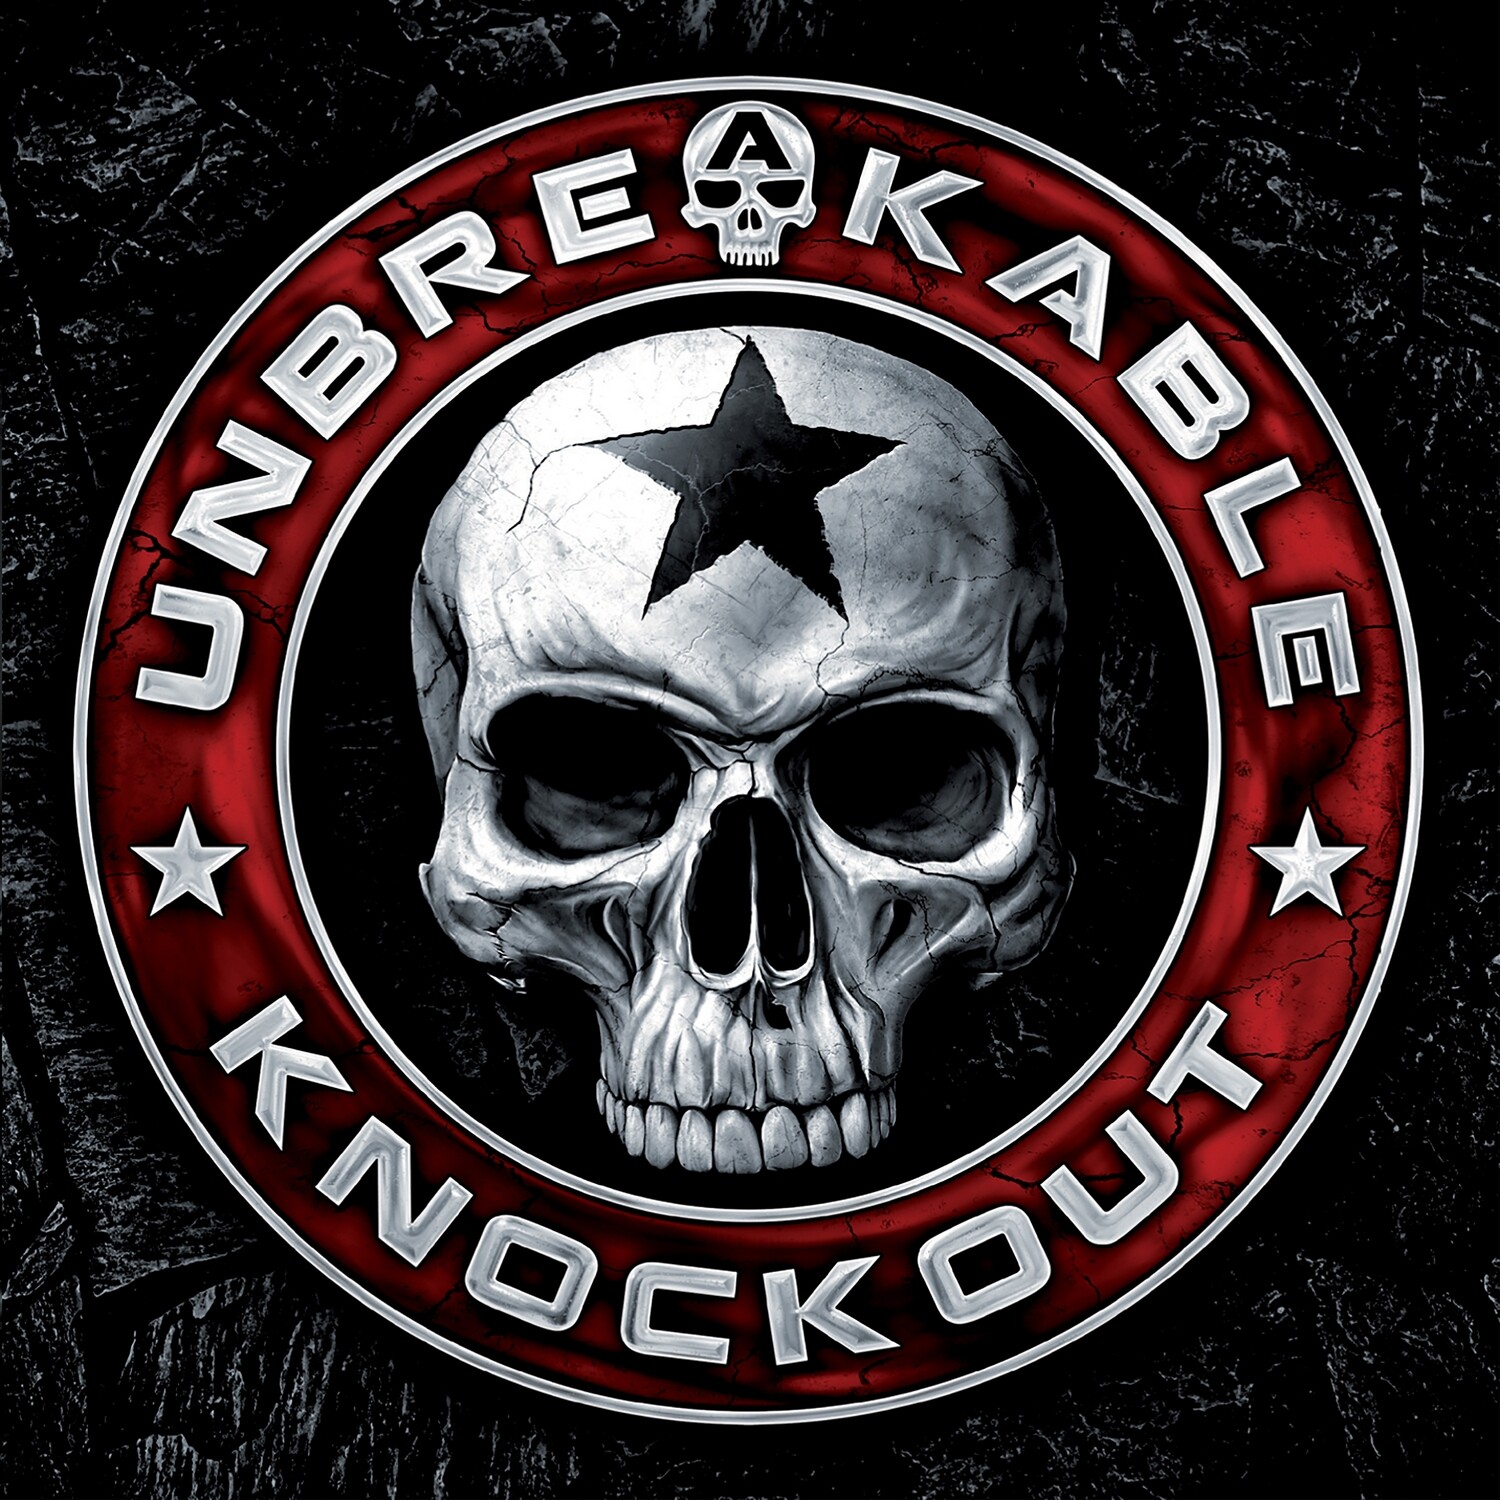 Knockout by Unbreakable [CD]